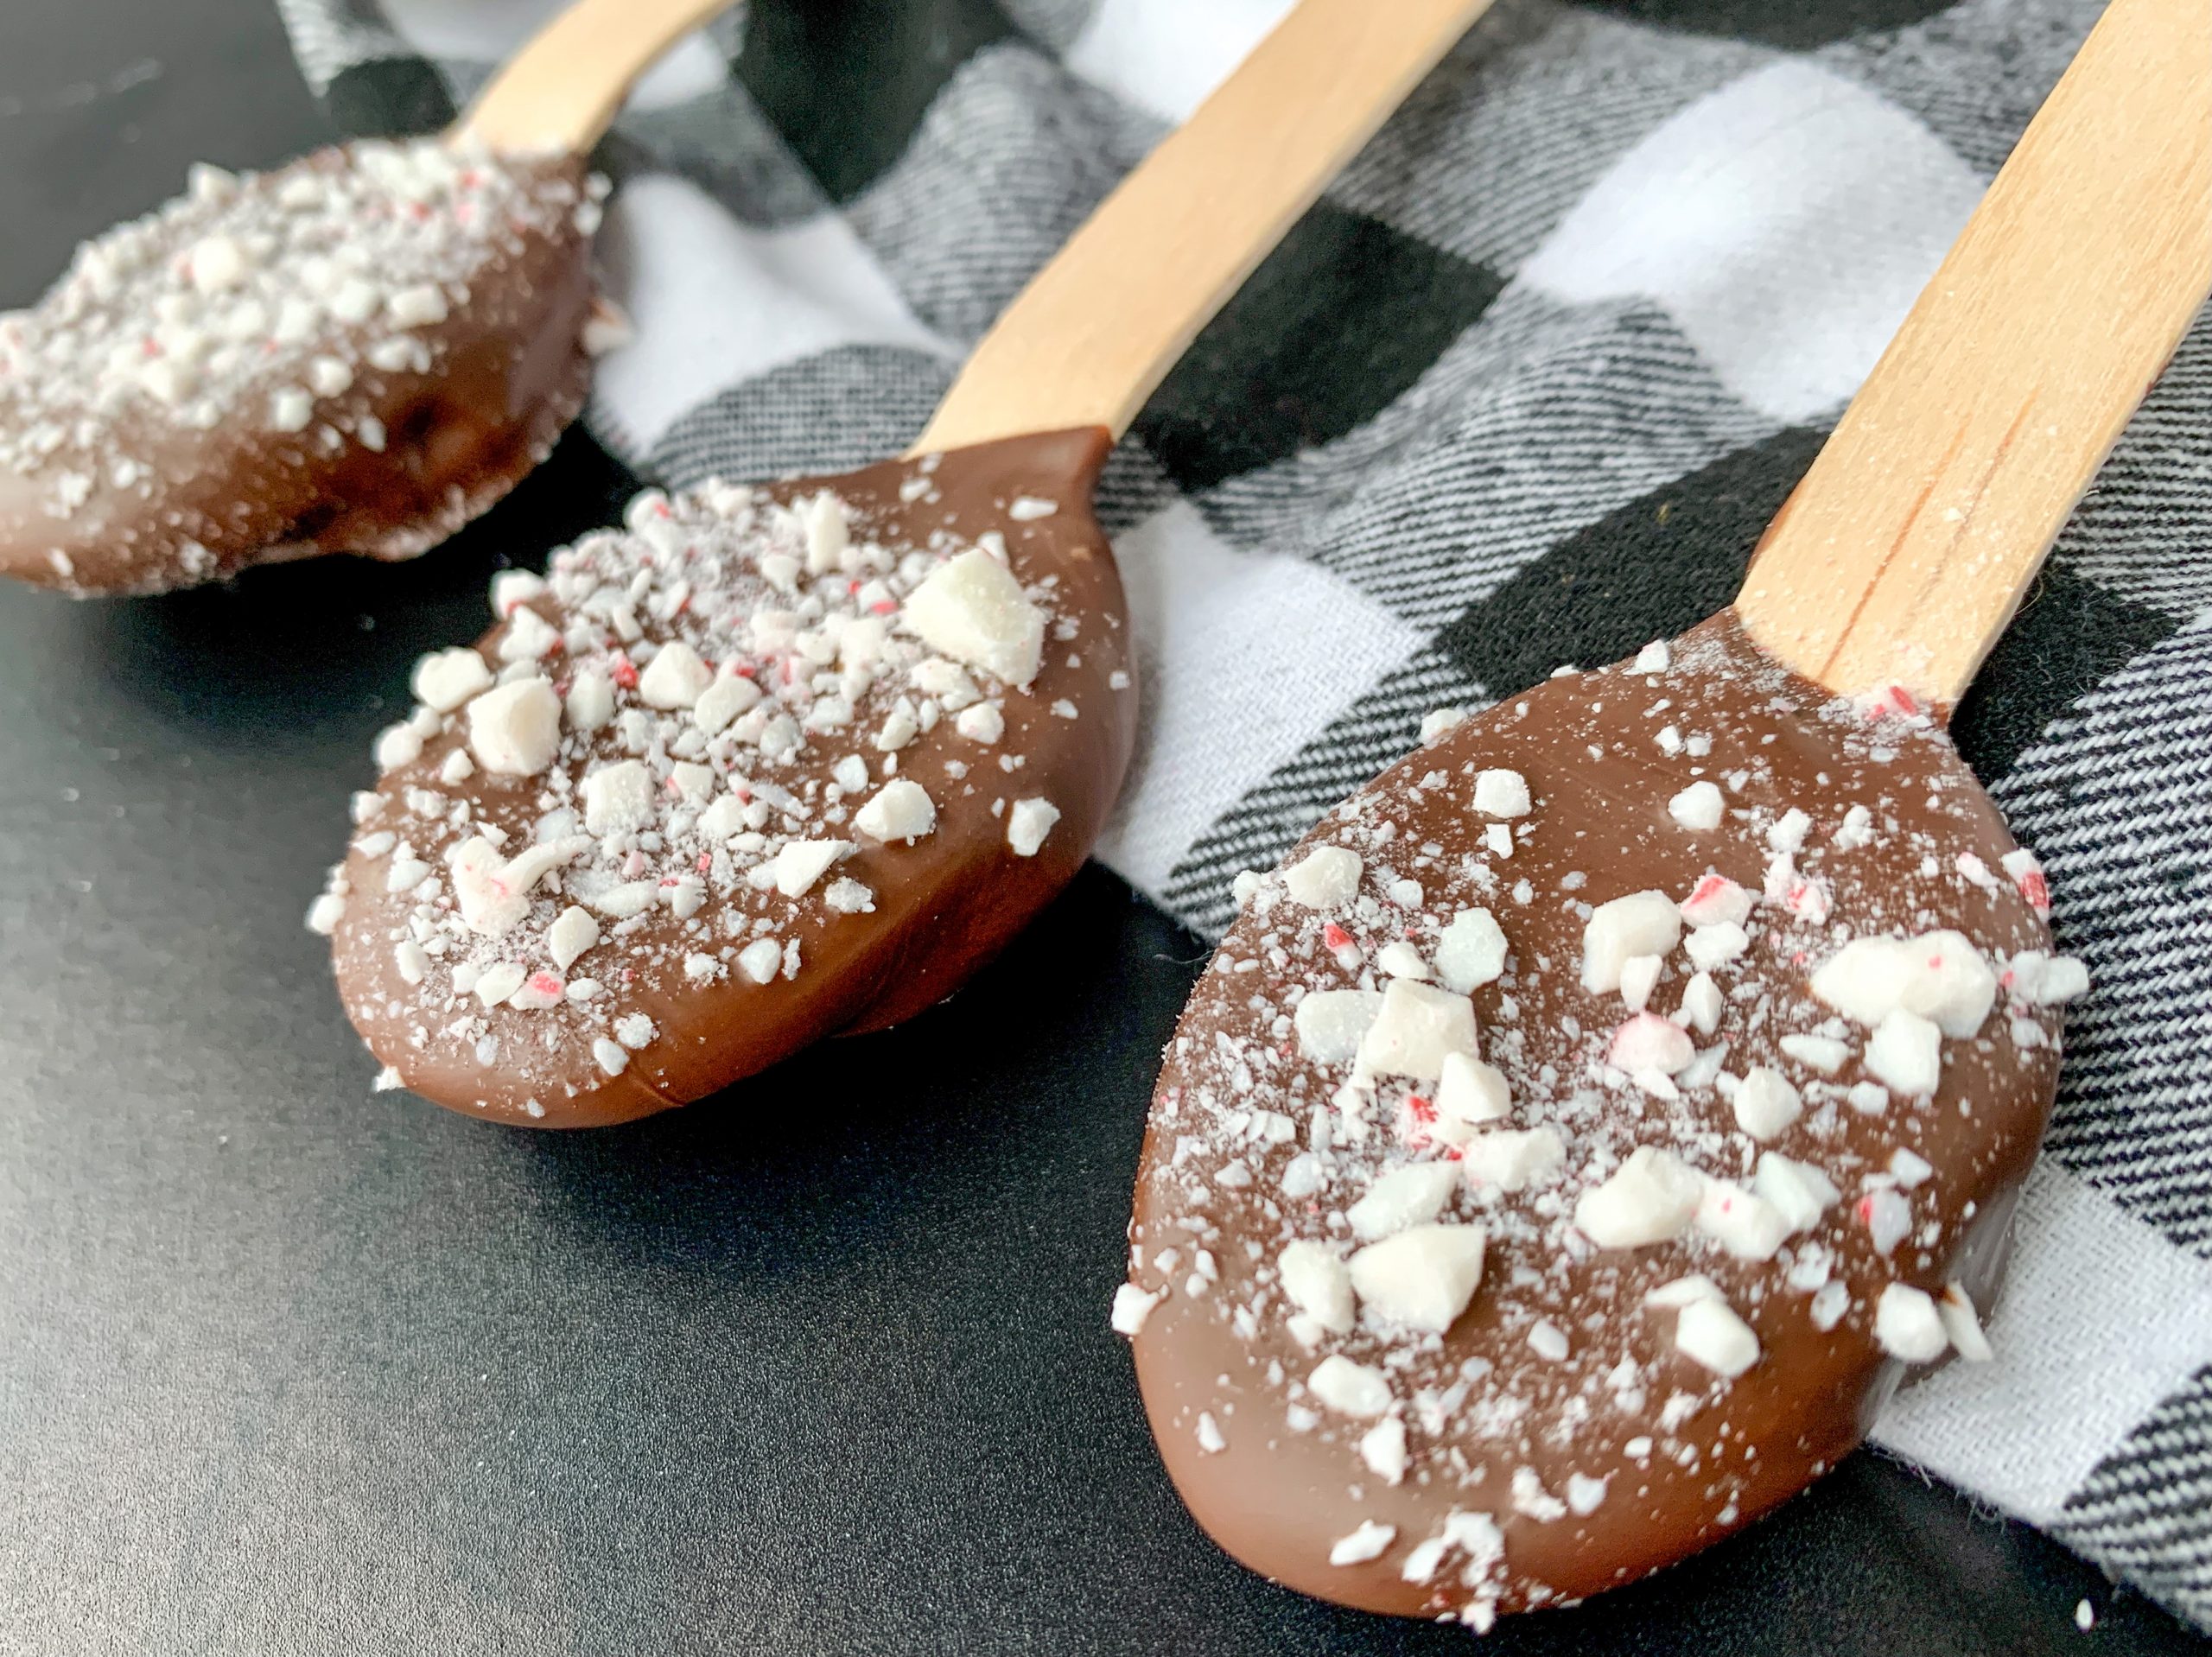 https://www.thedenverhousewife.com/wp-content/uploads/2020/11/Peppermint-Hot-cocoa-spoons-recipe-scaled.jpg